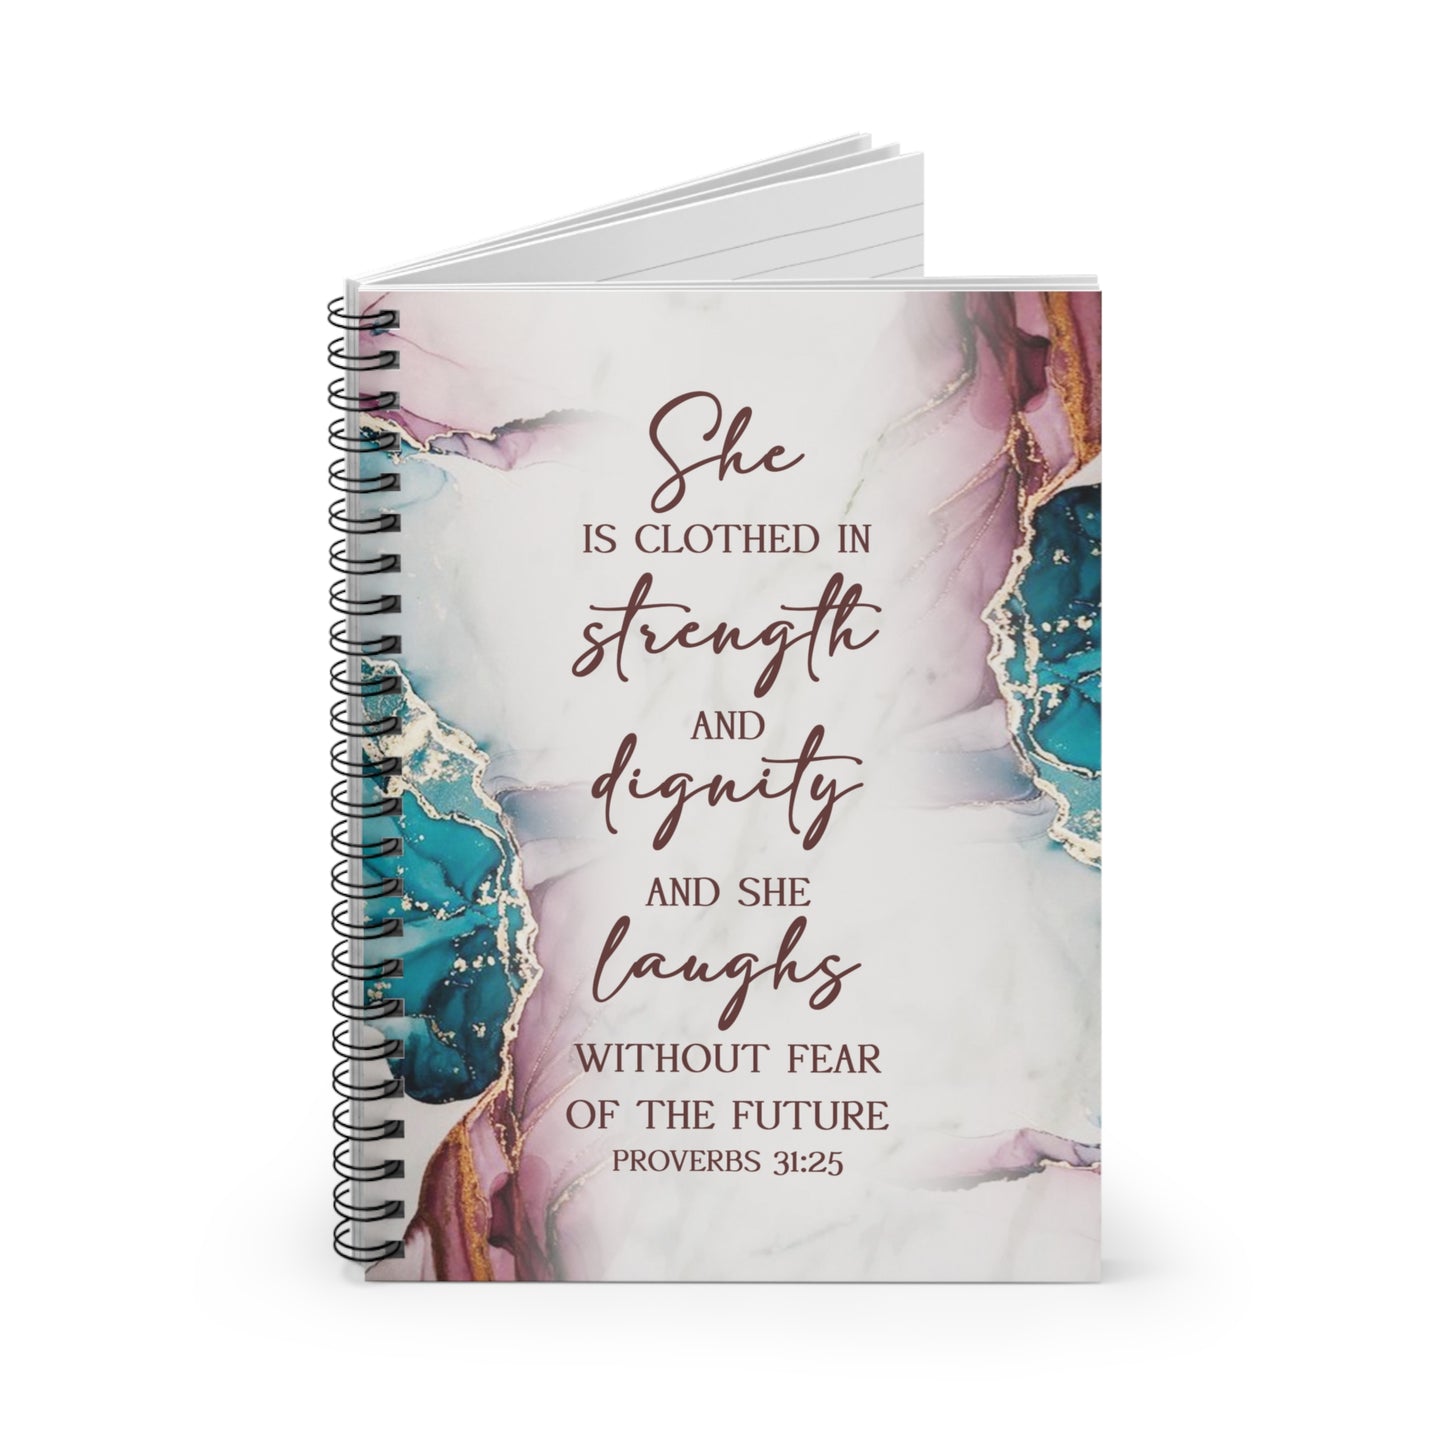 Proverbs 31:25 Spiral Notebook - Ruled Line